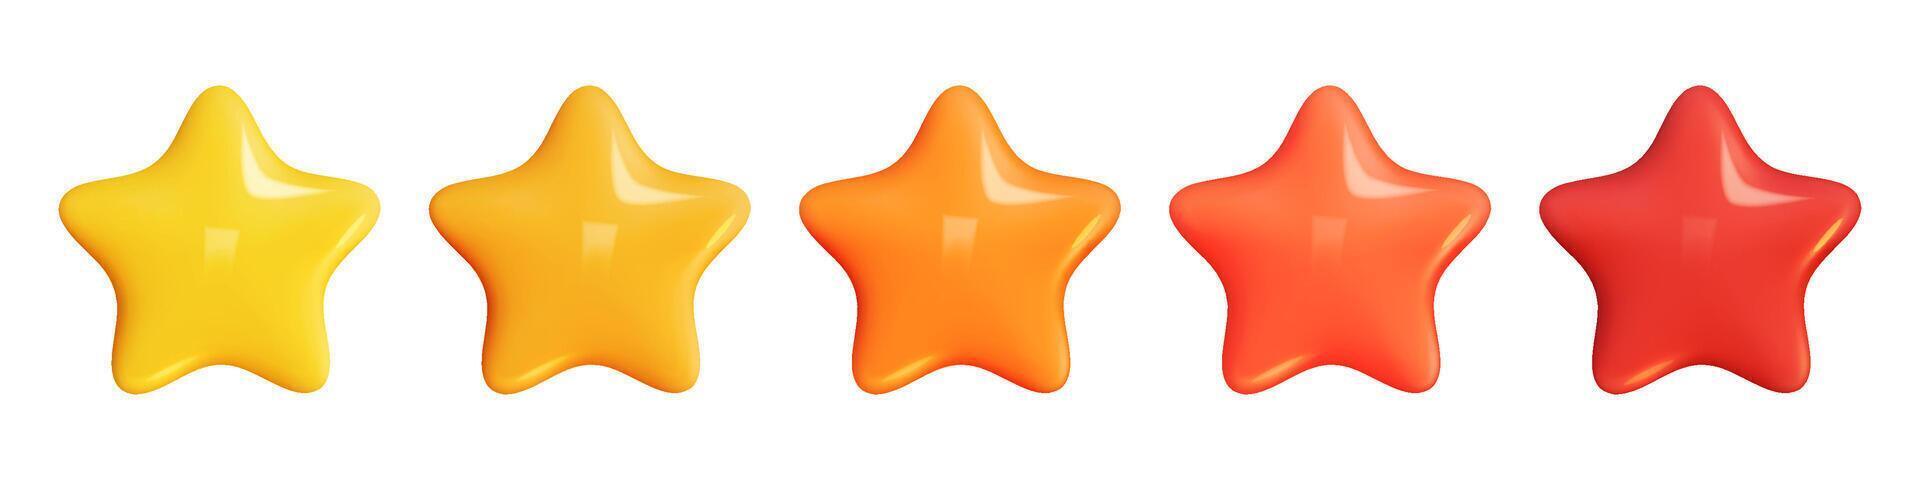 Star 3D Review plastic vector render. Set star for feedback and rank. 3d cartoon game element. Shape for app and game design. Vector illustration.